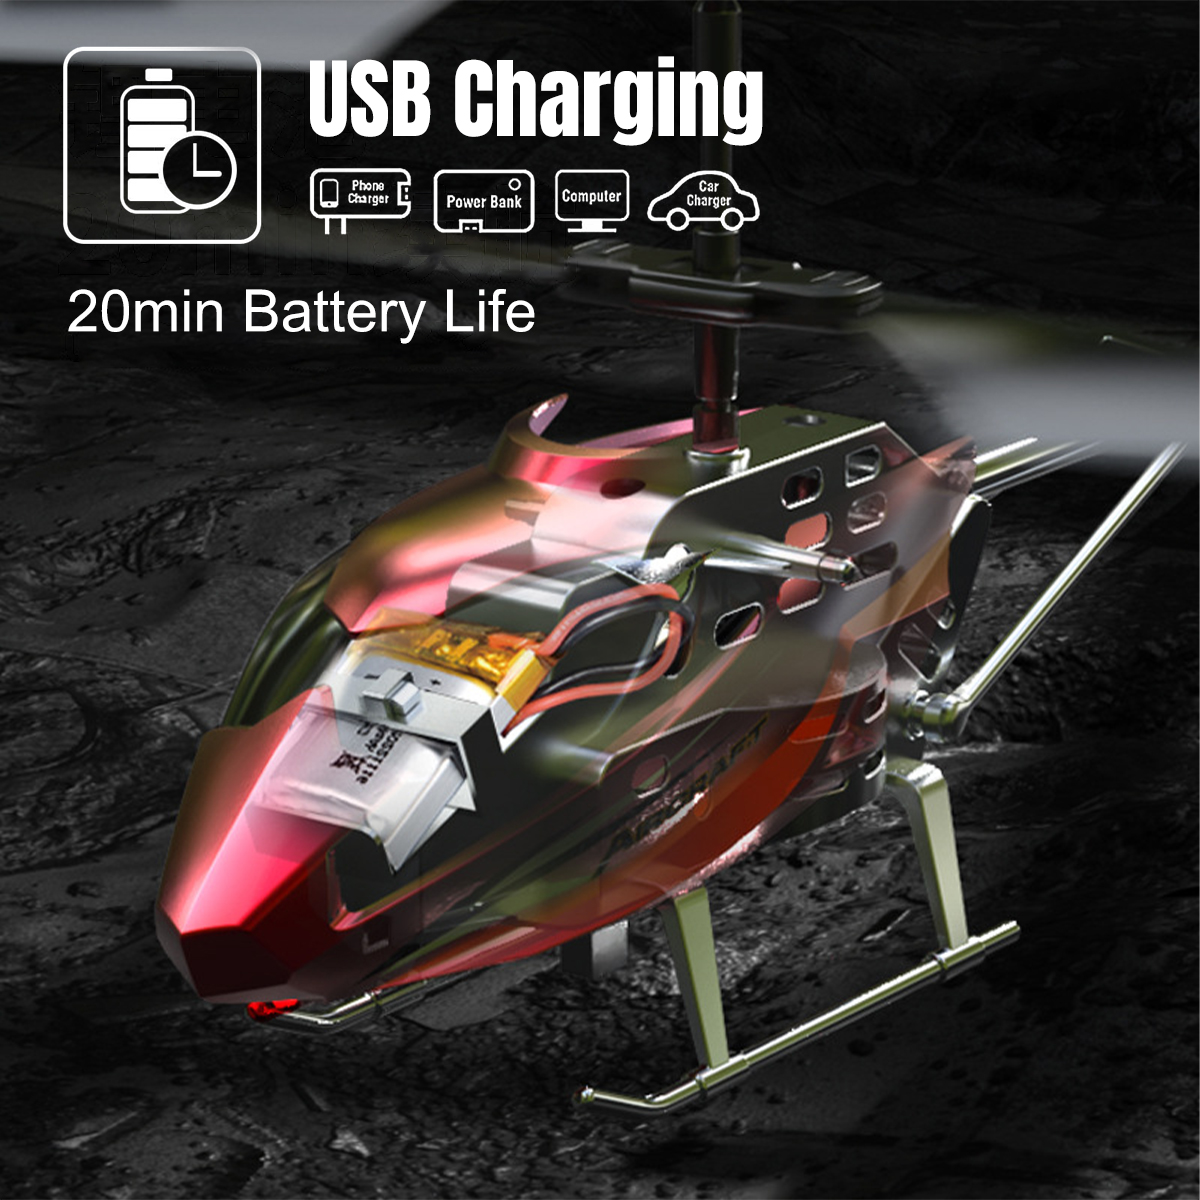 PayUSD Remote Control Helicopter Mini Gyroscope RC Helicopters LED Light for Indoor to Fly for Kids and Beginners, Red - image 4 of 8